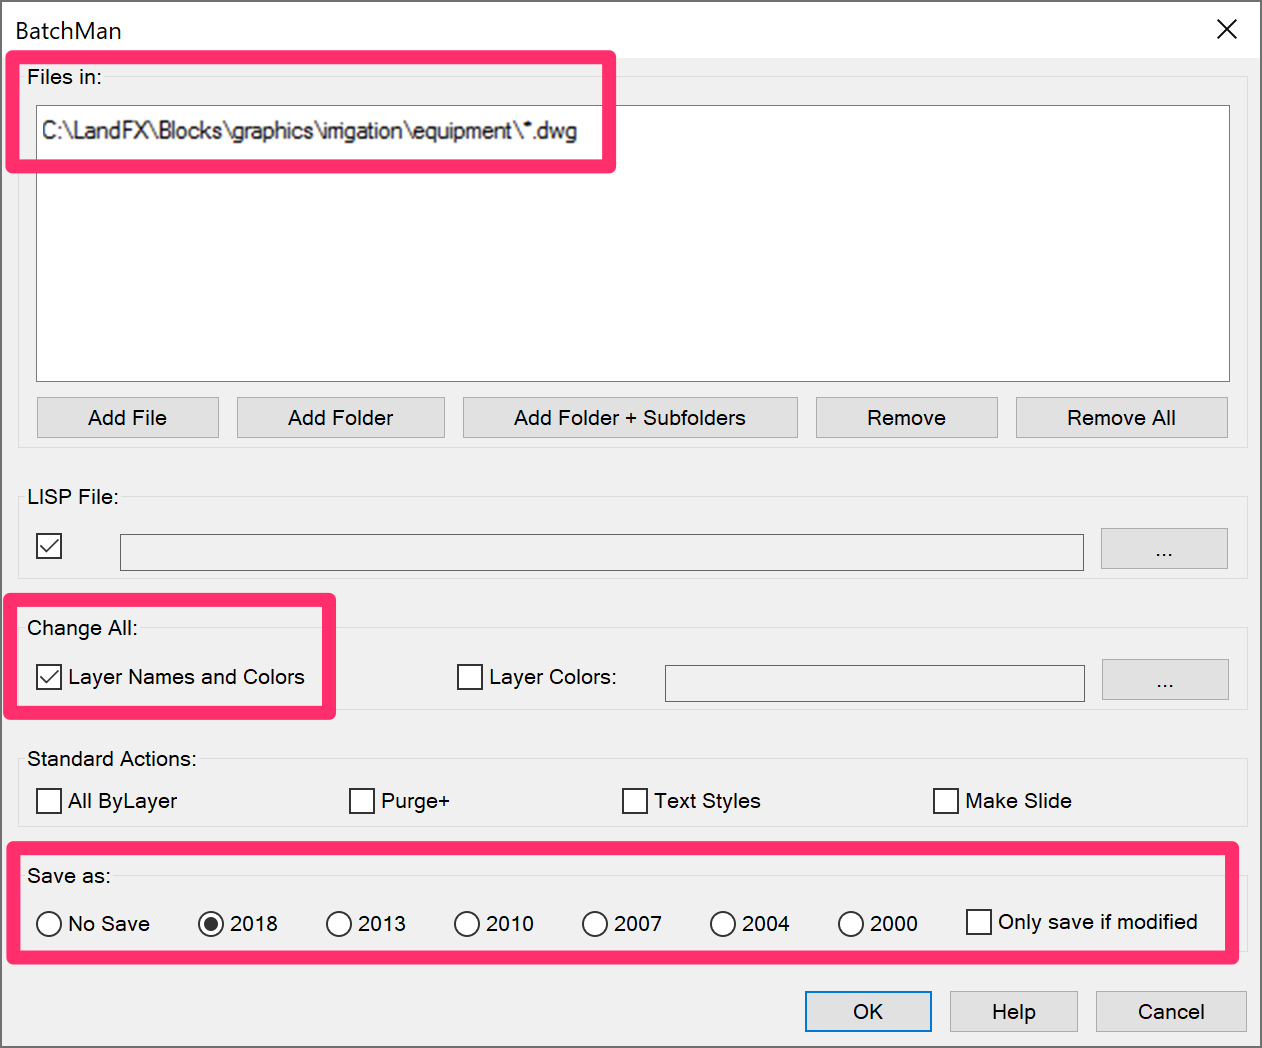 BatchMan dialog box, files to change listed, Layer Names and Colors option selected